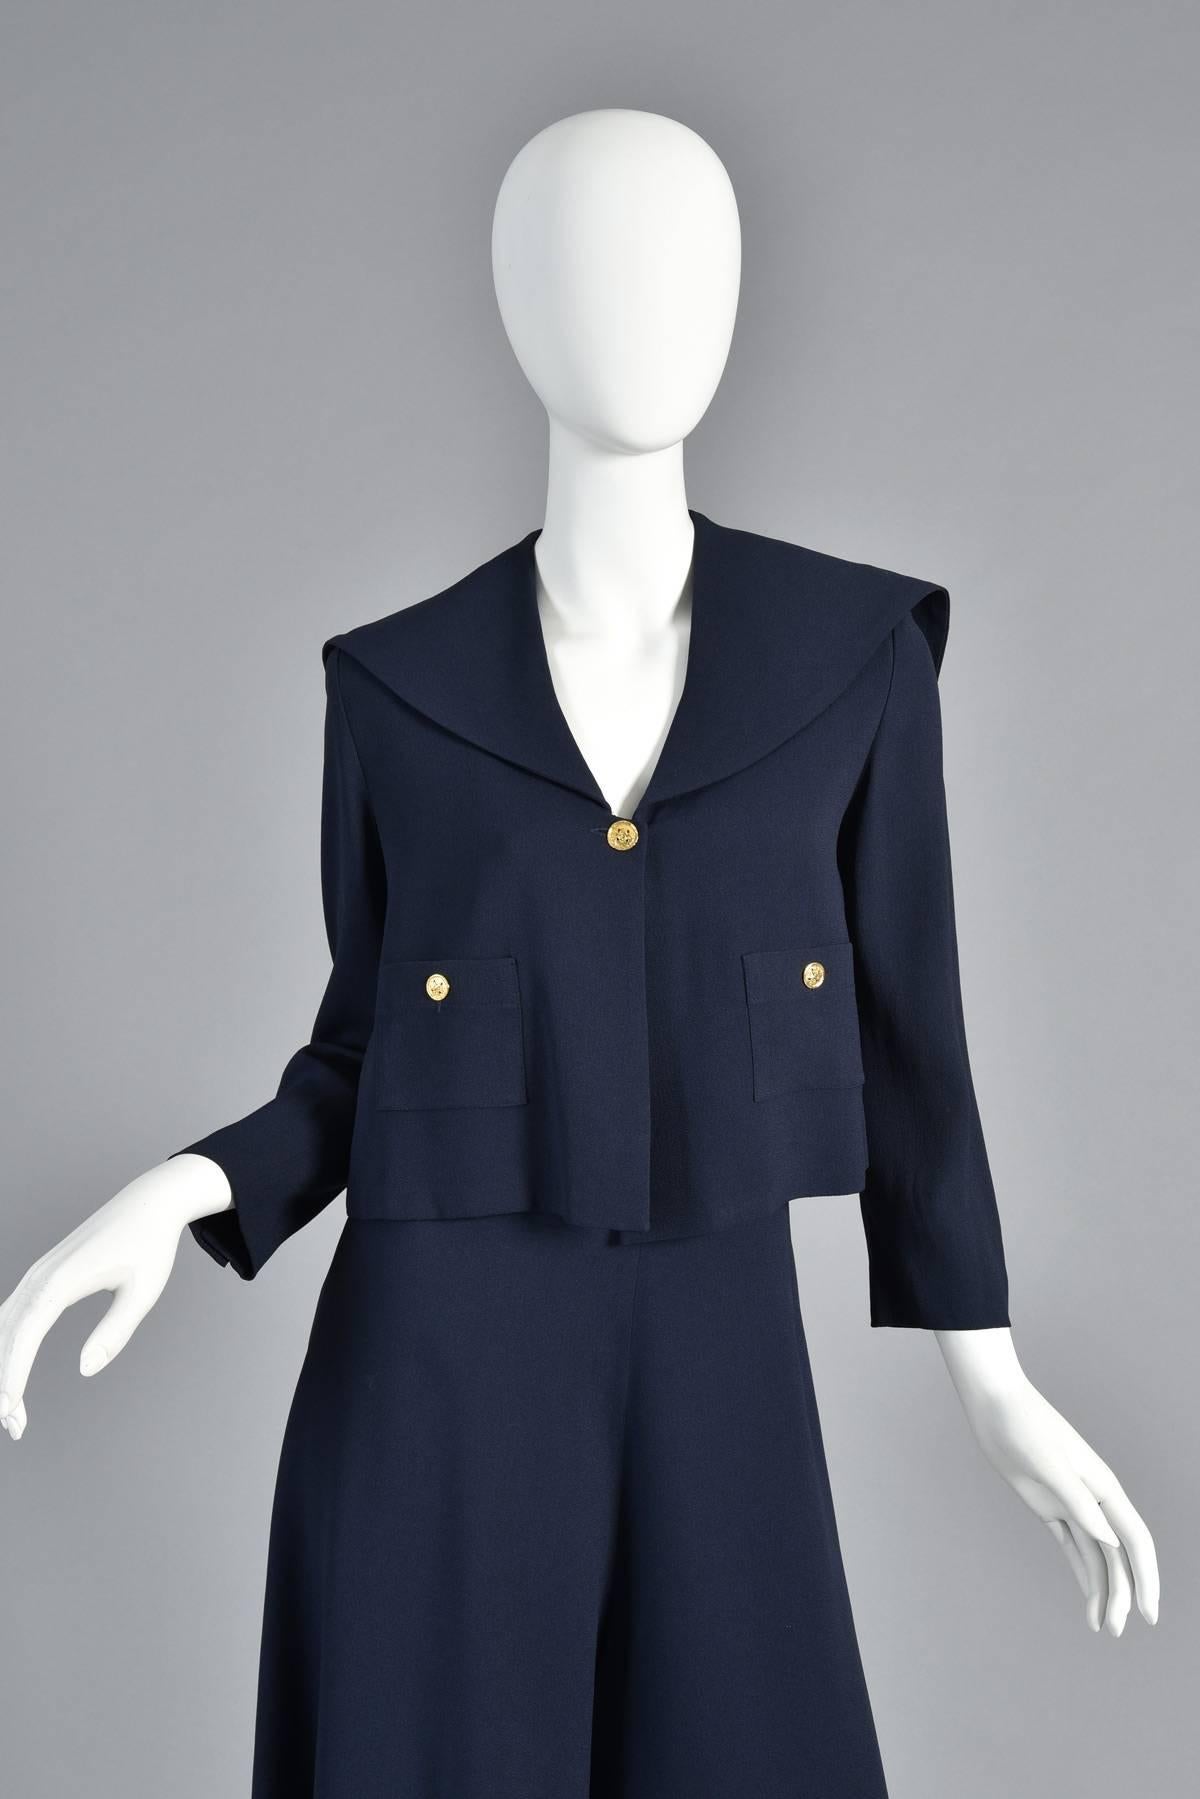 Black Sonia Rykiel Sailor Inspired Gaucho Pant Suit For Sale